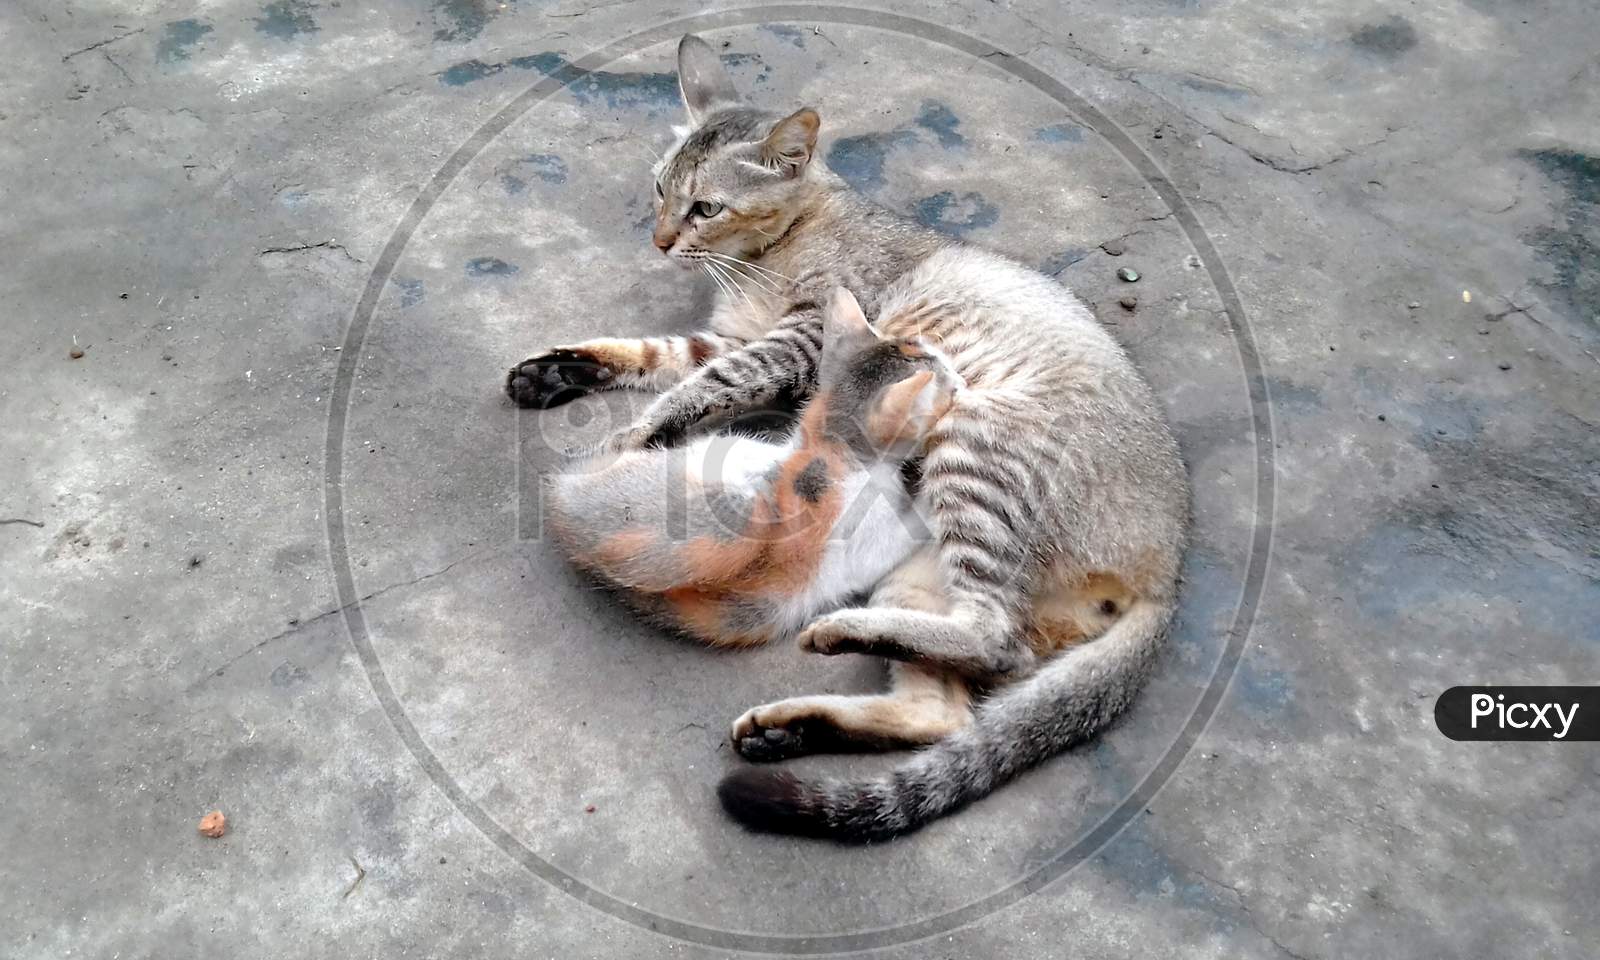 Image of the Indian cat looks like tiger sitting with it's baby ...